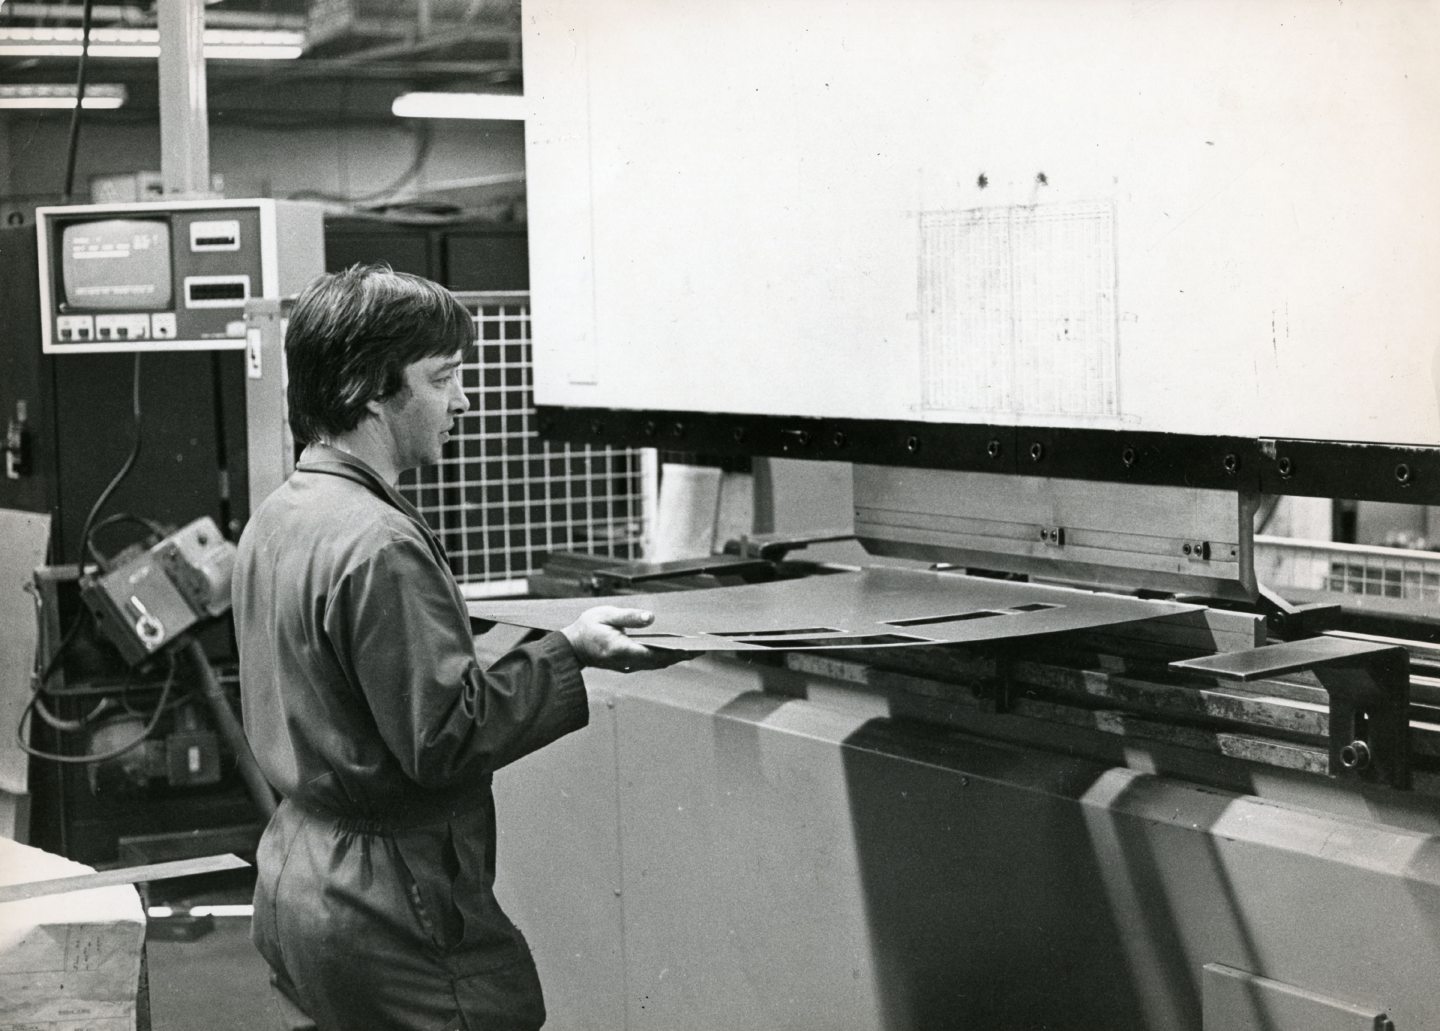 Bill Anderson operates a guillotine at Torbrex Engineering in December 1984. Image: DC Thomson.